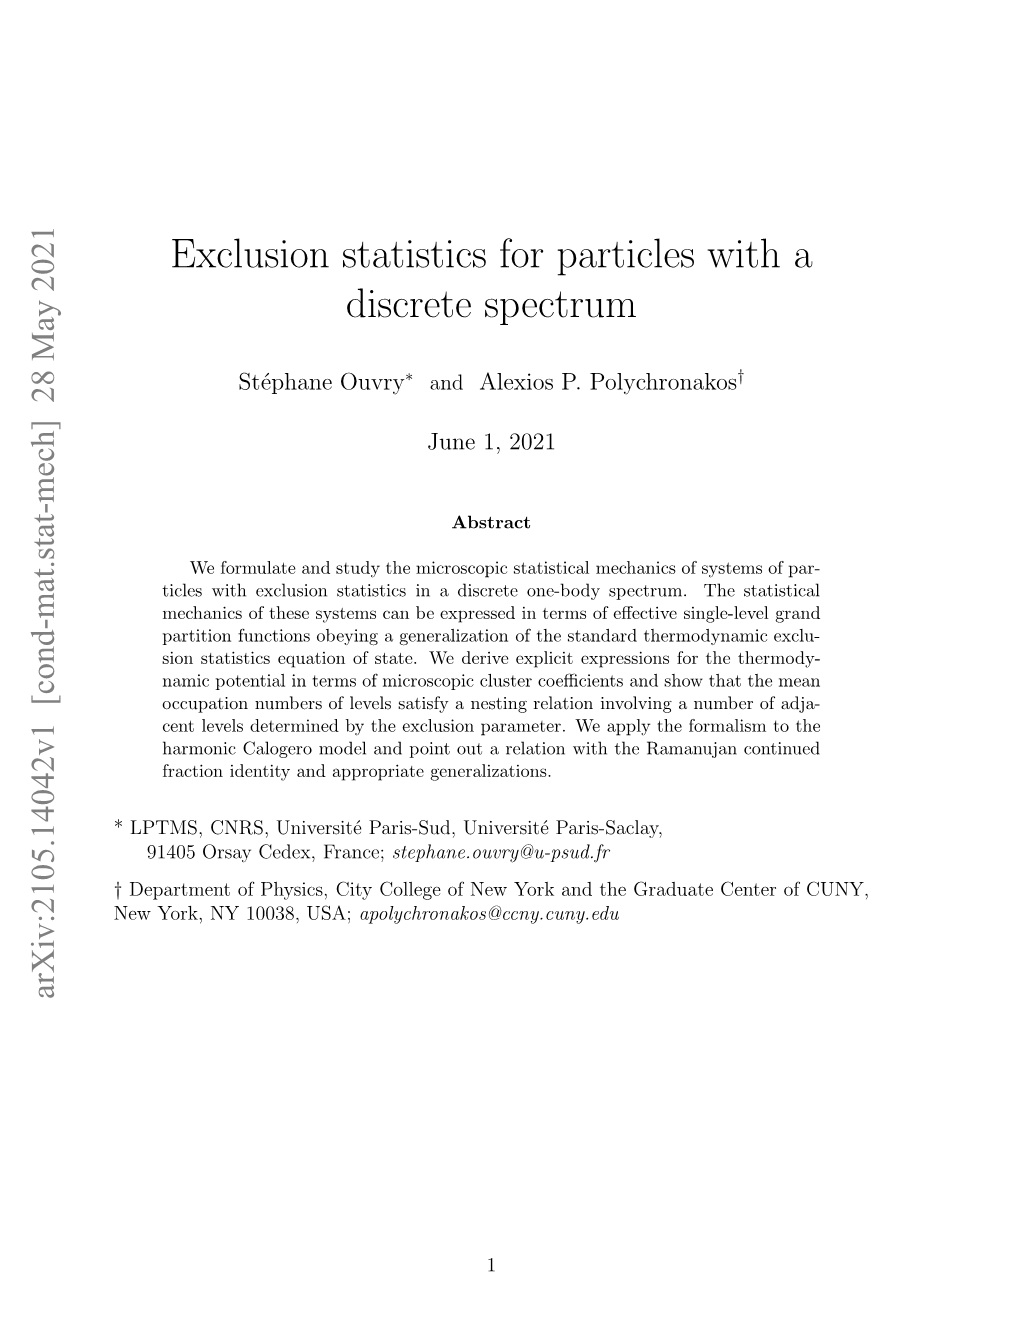 Exclusion Statistics for Particles with a Discrete Spectrum